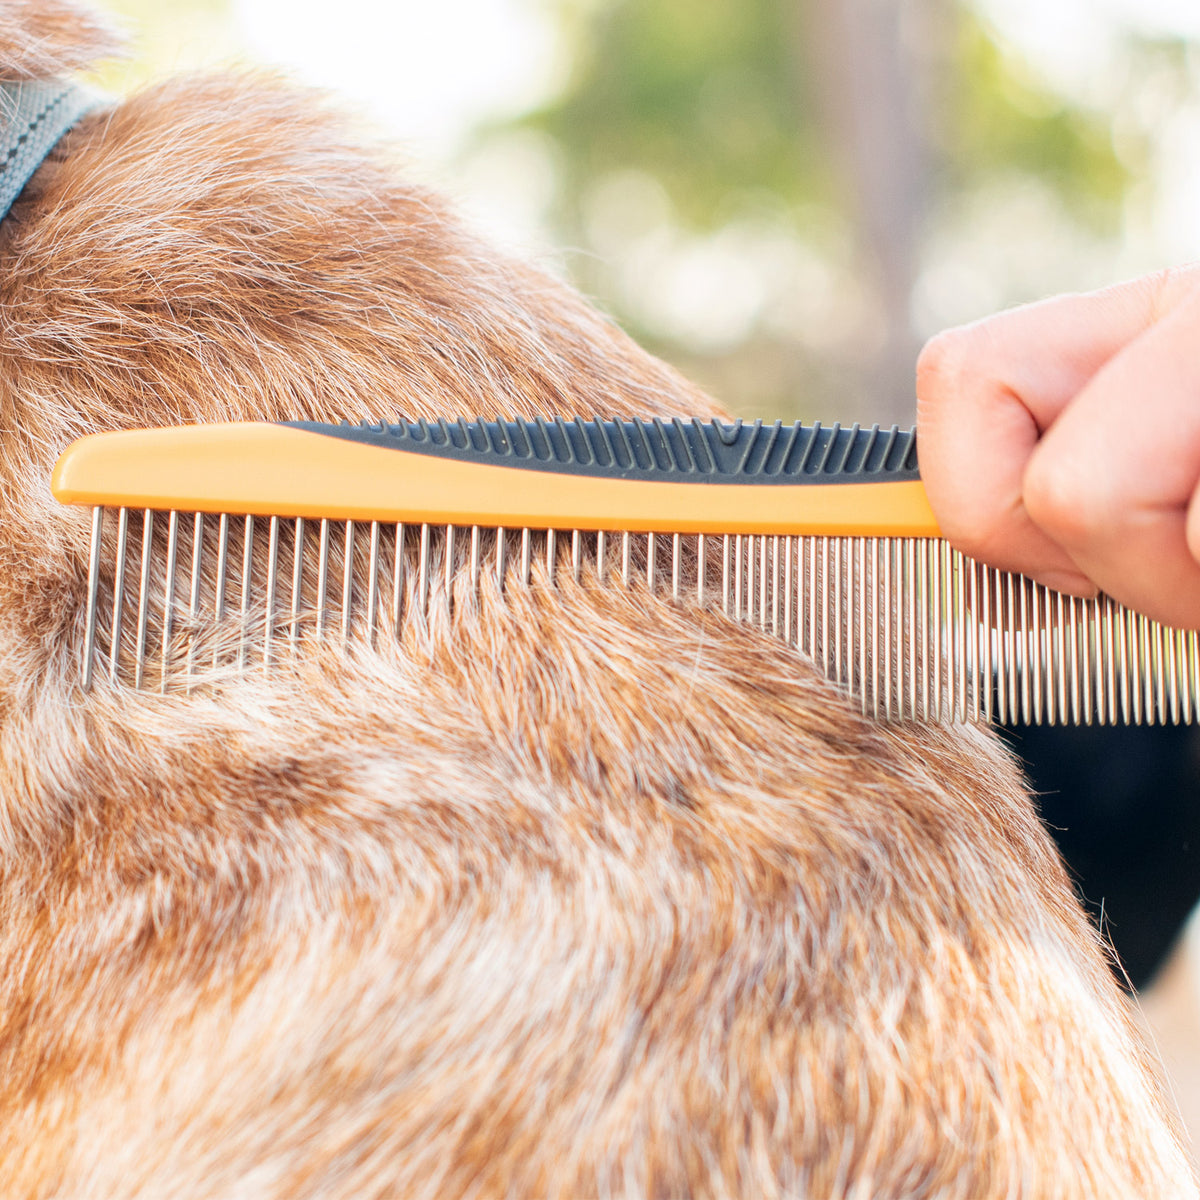 The Rufus & Coco Detangling Comb is the perfect pet grooming tool for gently removing knots and tangles from your dog or cat’s coat. It features an easy-grip handle and stainless-steel teeth - perfect for grooming pets of all sizes, especially the curliest dog and cat coats! The detangling comb is suitable for pets with an undercoat, long or curly-haired breeds.